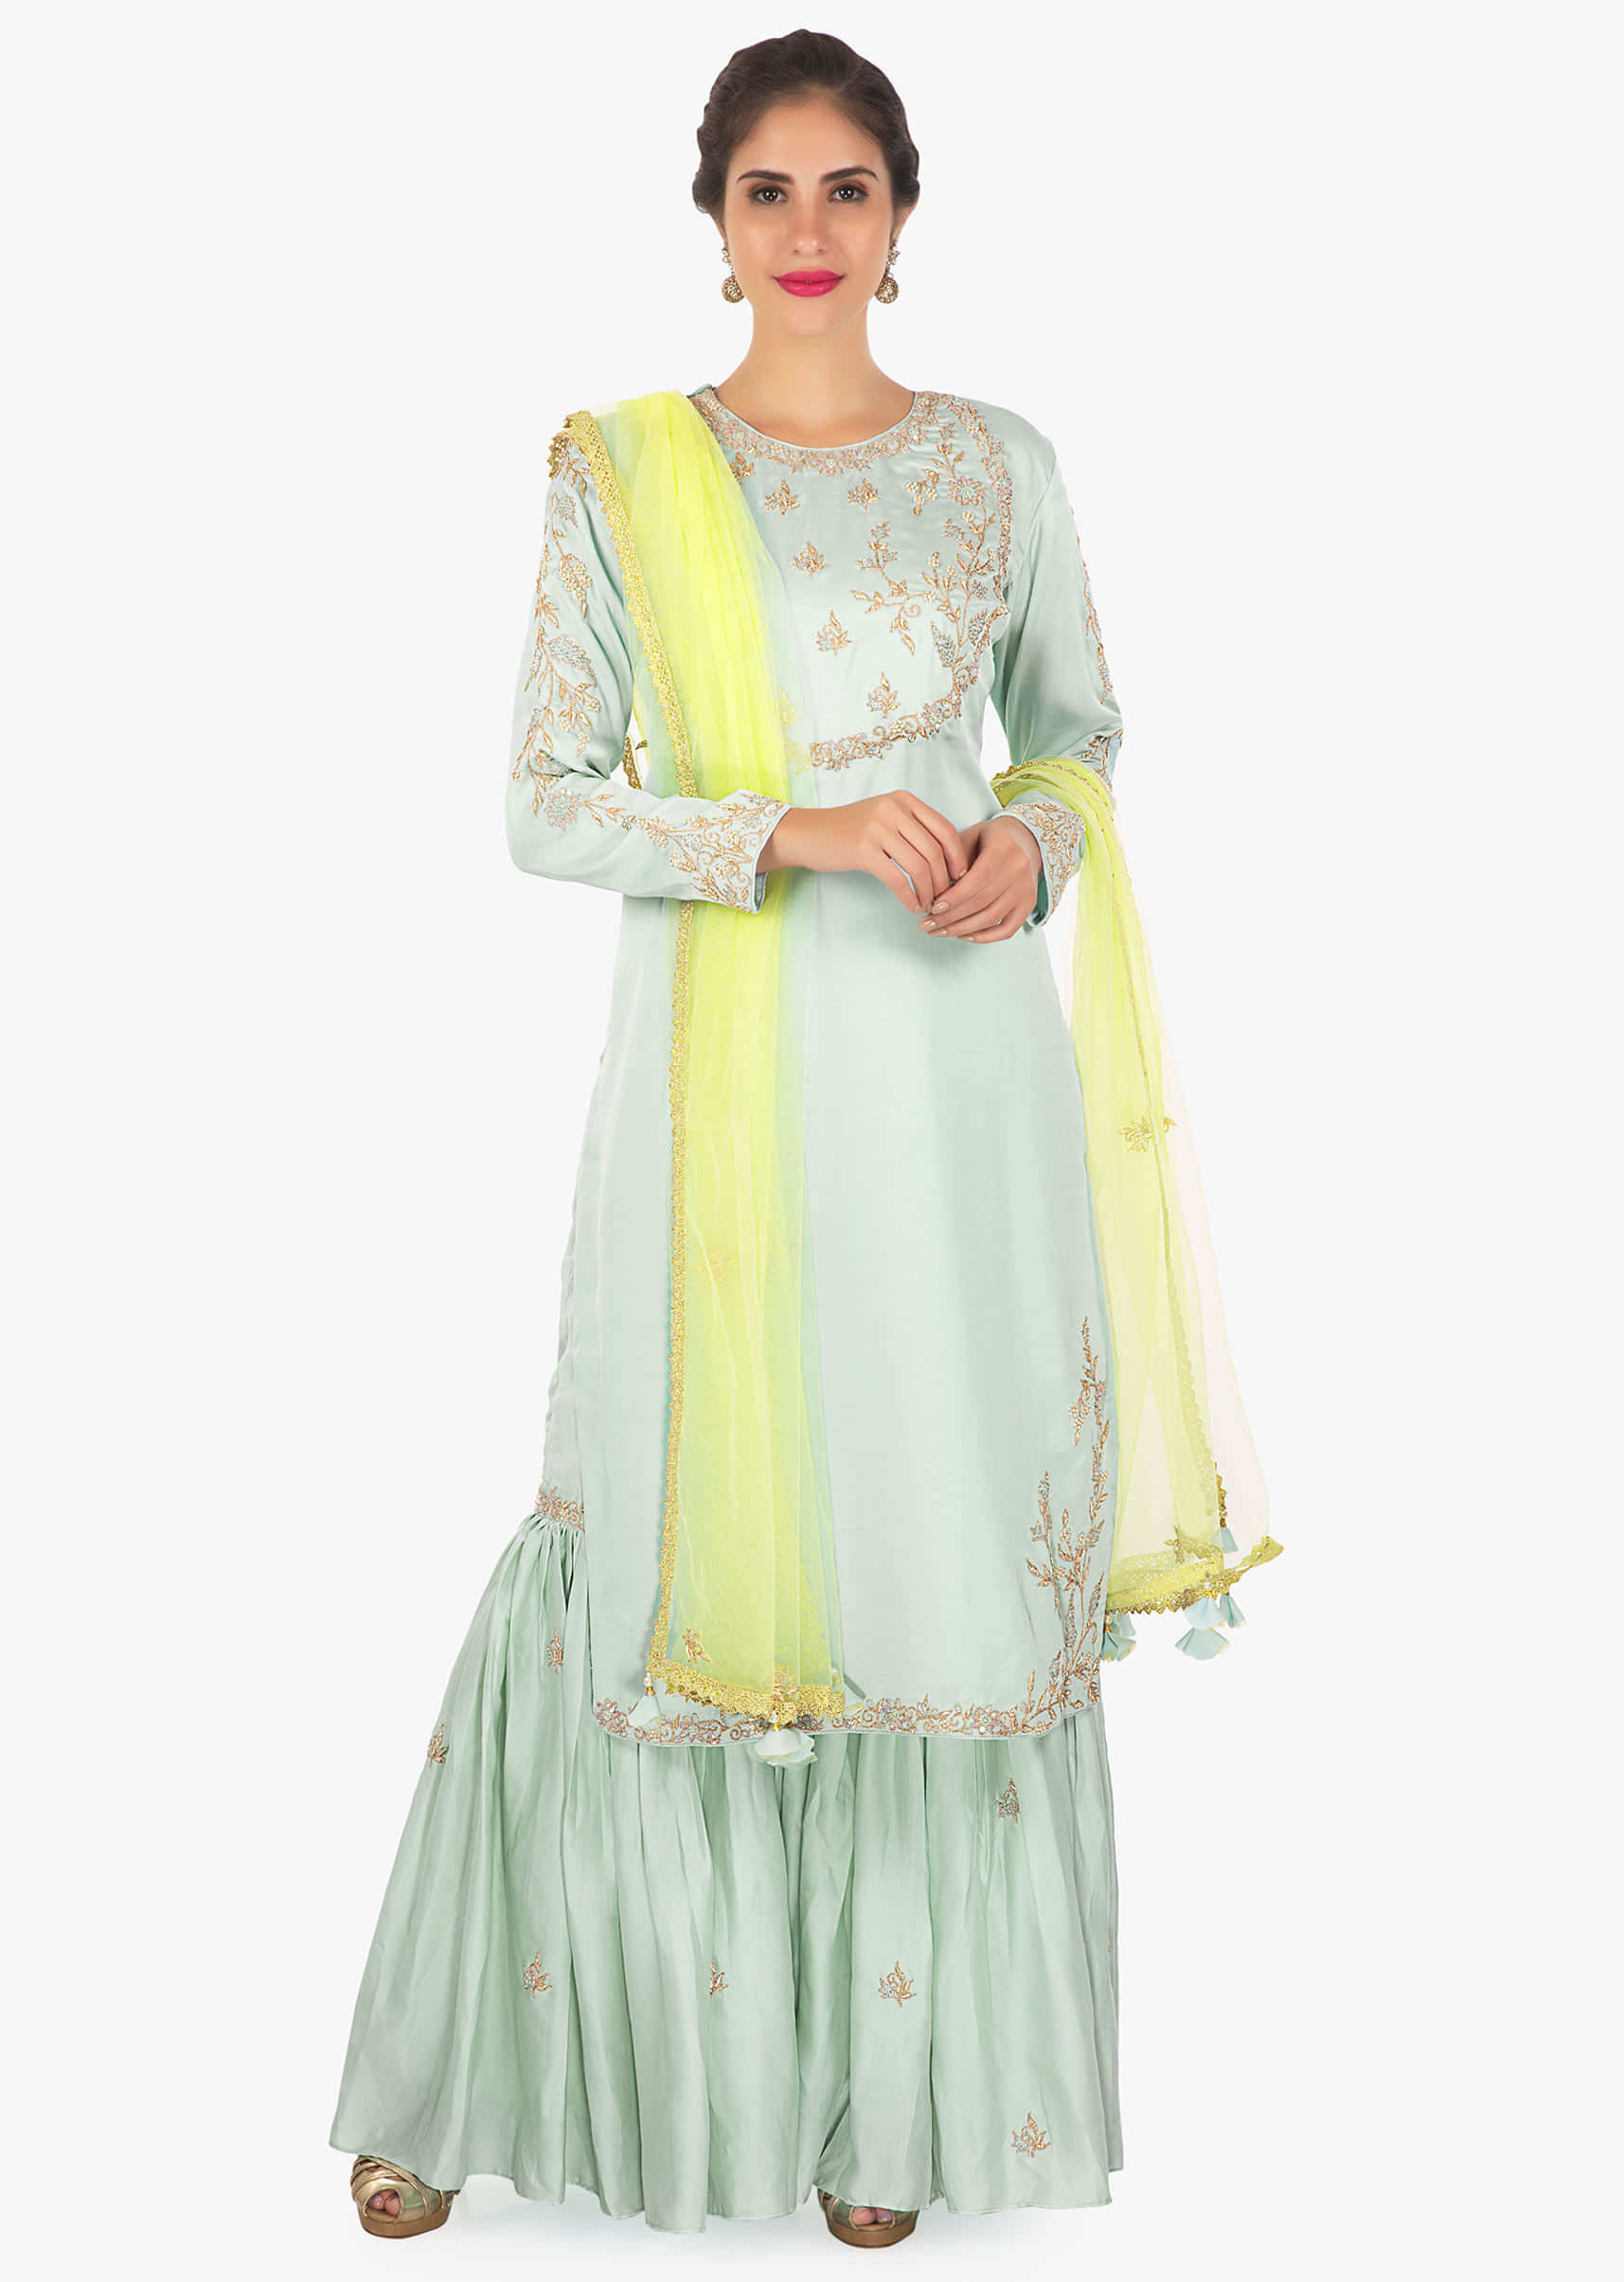 Mint Green Kurti In Zardosi And Sequins Embroidery With Sharara Pant And Yellow Net Dupatta